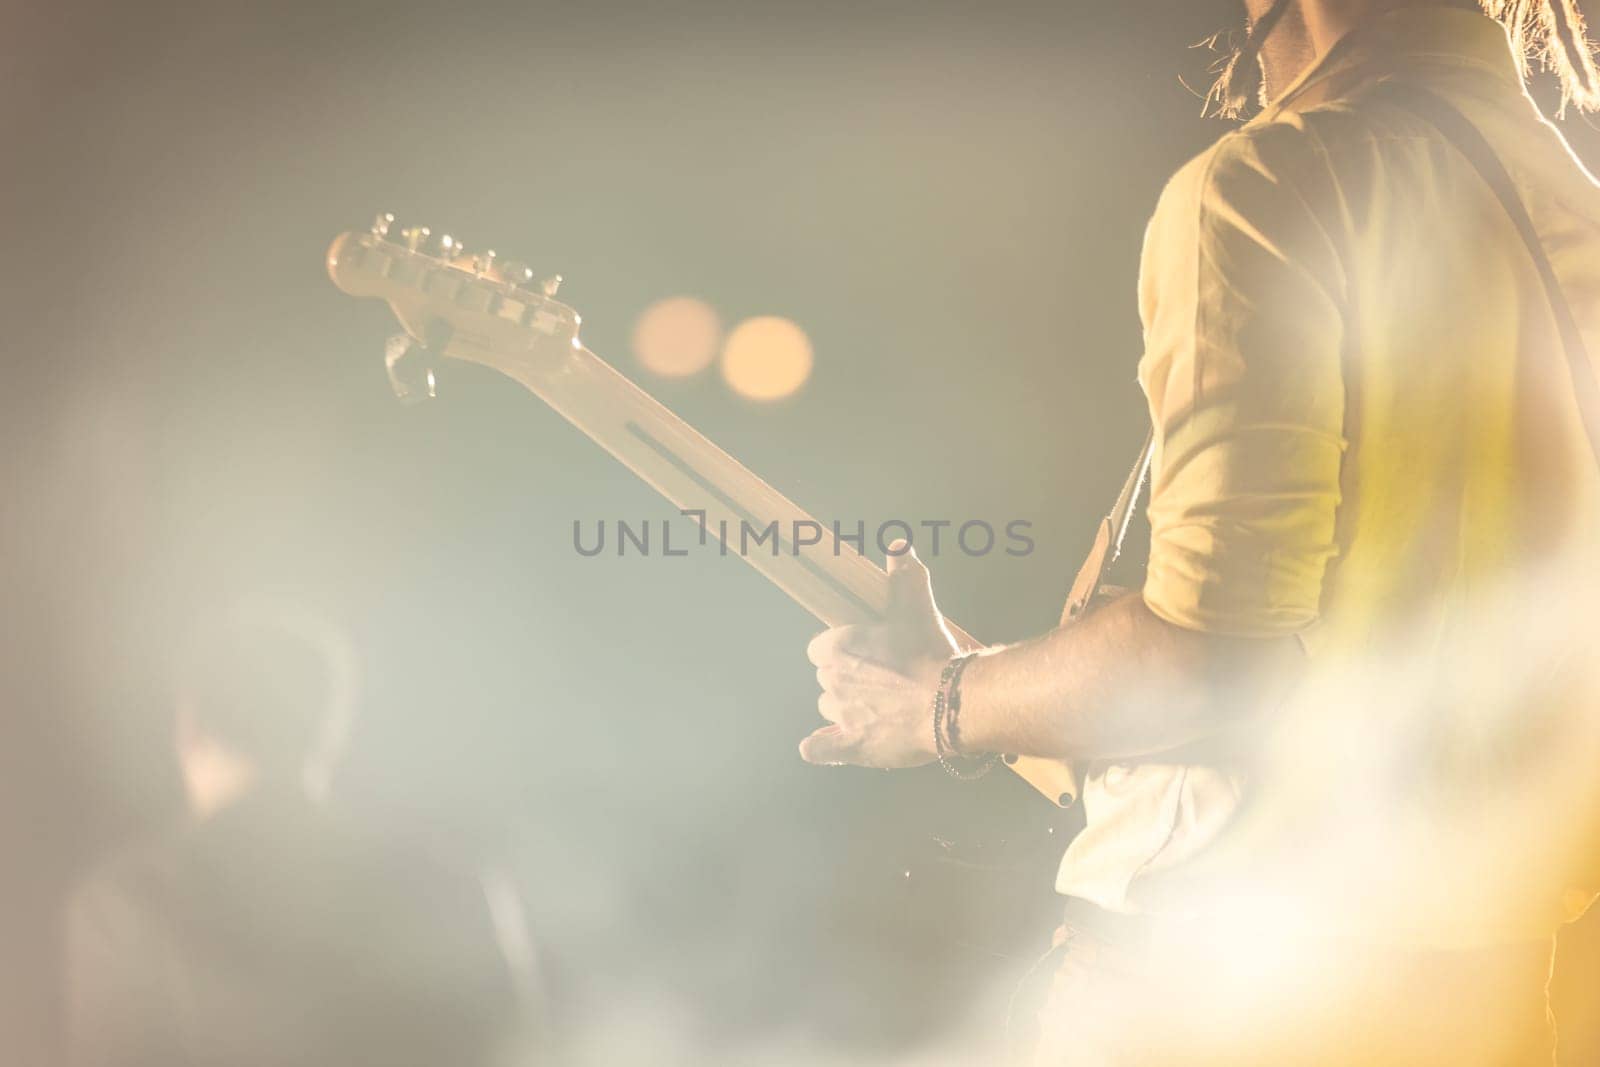 Guitarist's Back During Night Concert by pippocarlot